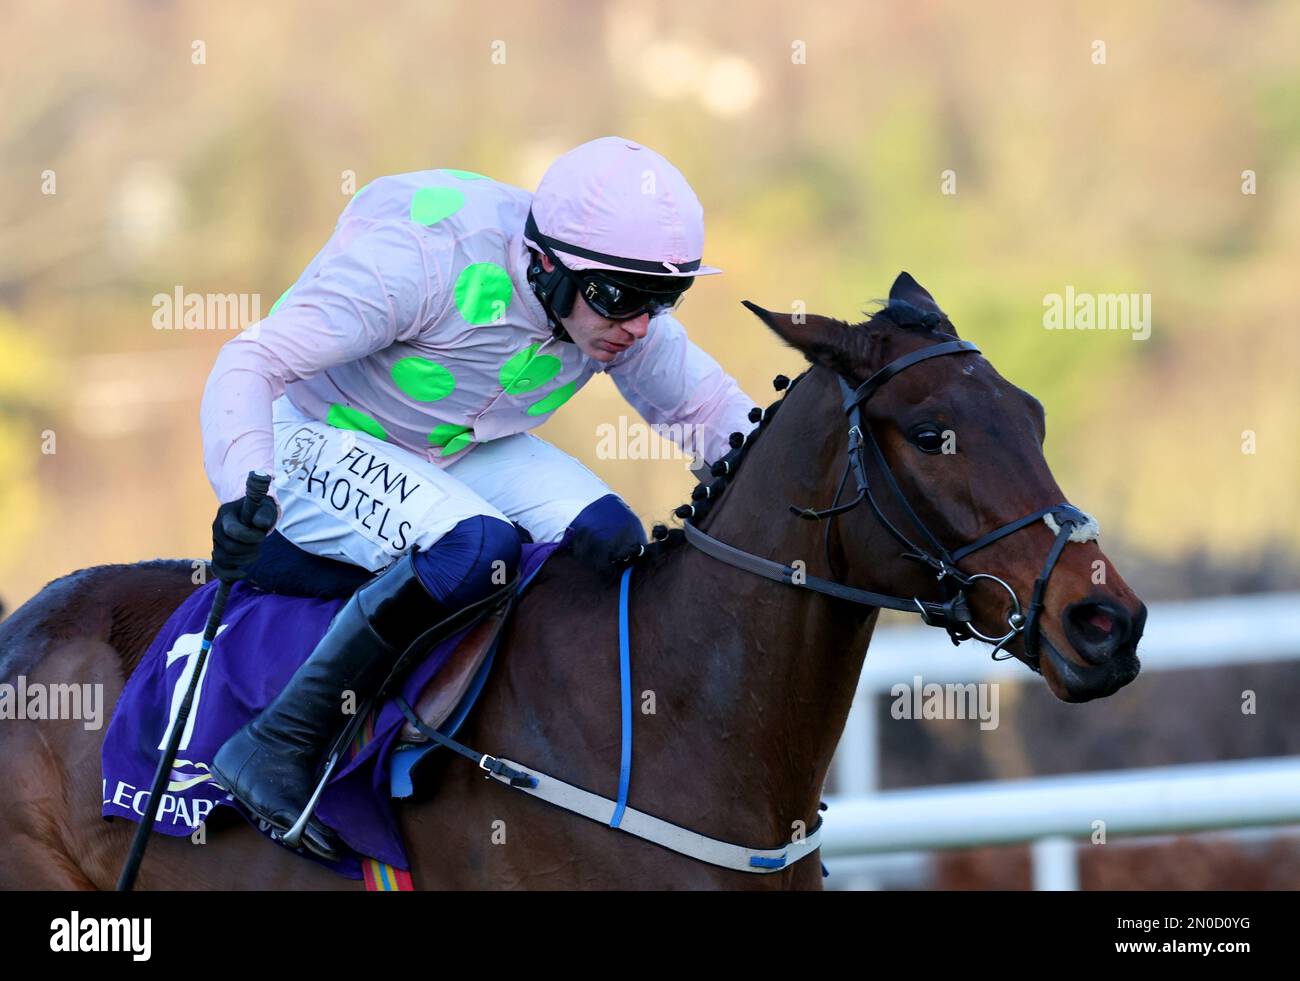 Gaelic Warrior ridden by jockey Paul Townend on their way to winning the Festina Lente Charity Liffey Handicap Hurdle during day two of the Dublin Racing Festival at Leopardstown Racecourse in Dublin, Ireland. Picture date: Sunday February 5, 2023. Stock Photo